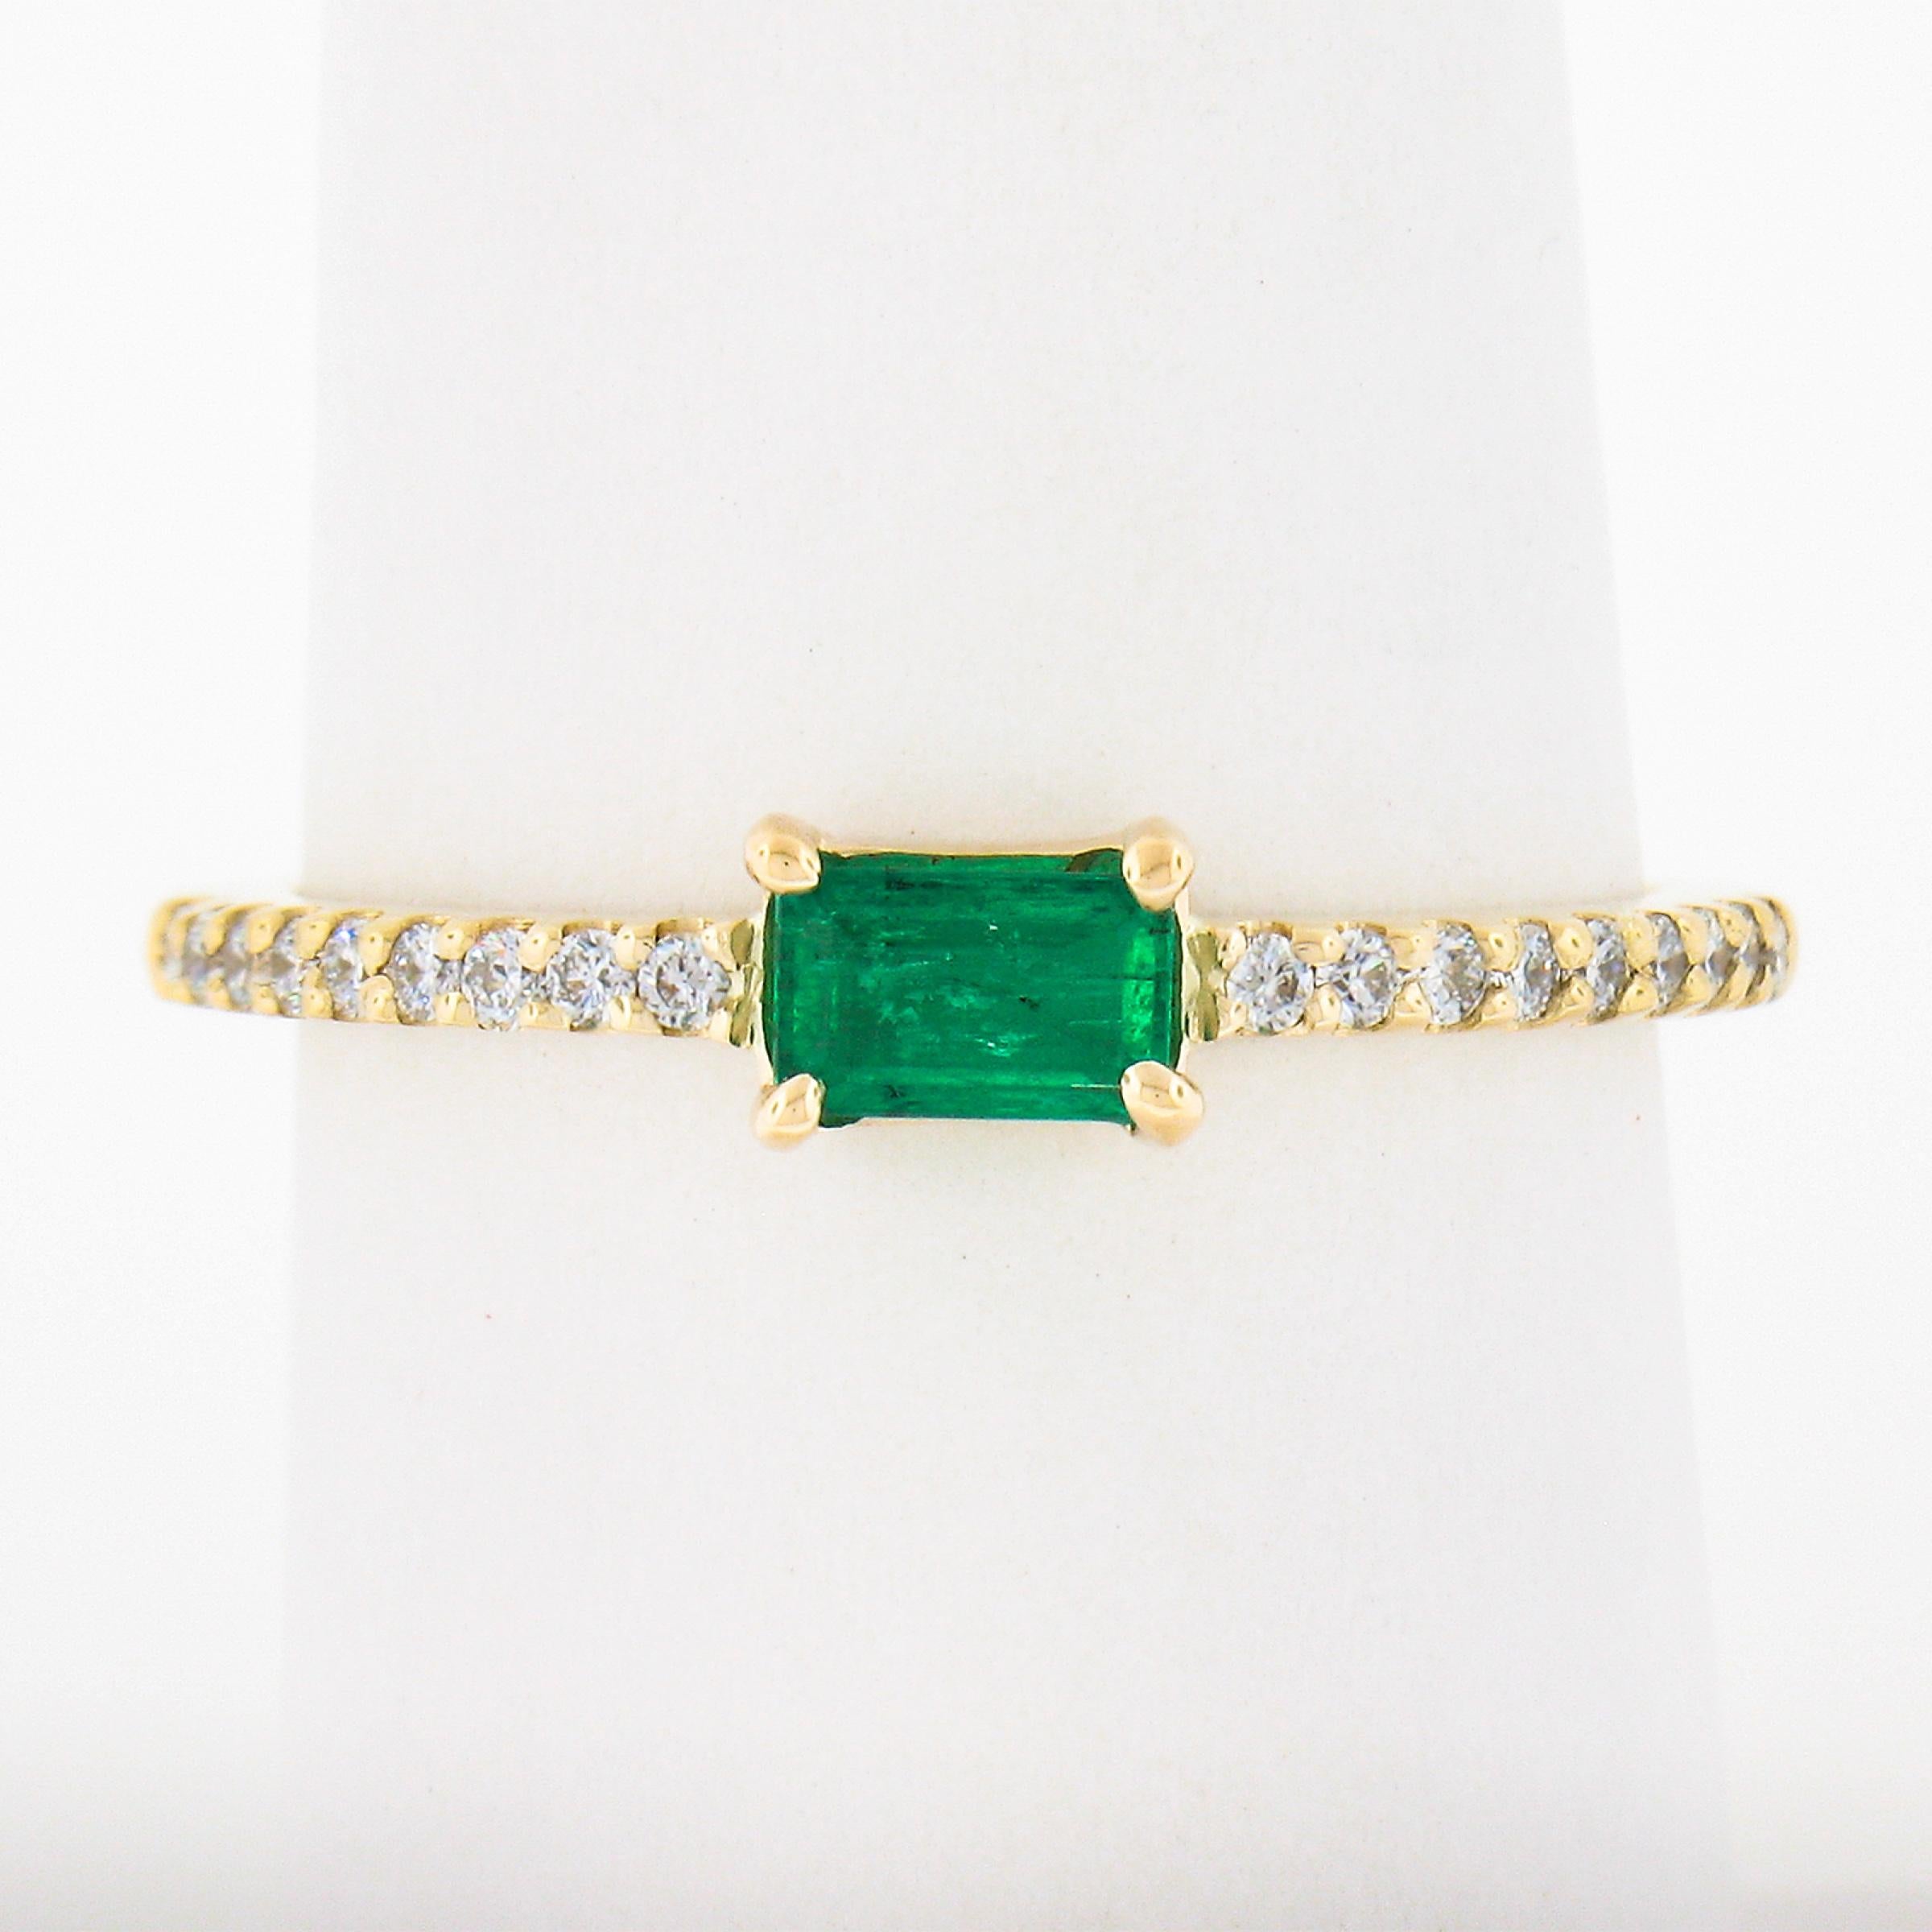 A simple yet gorgeous, emerald solitaire ring that is newly crafted from solid 14k yellow gold. The solitaire is elongated emerald cut with a nice vivid green color accented with 18 diamonds that are all set in prongs settings.